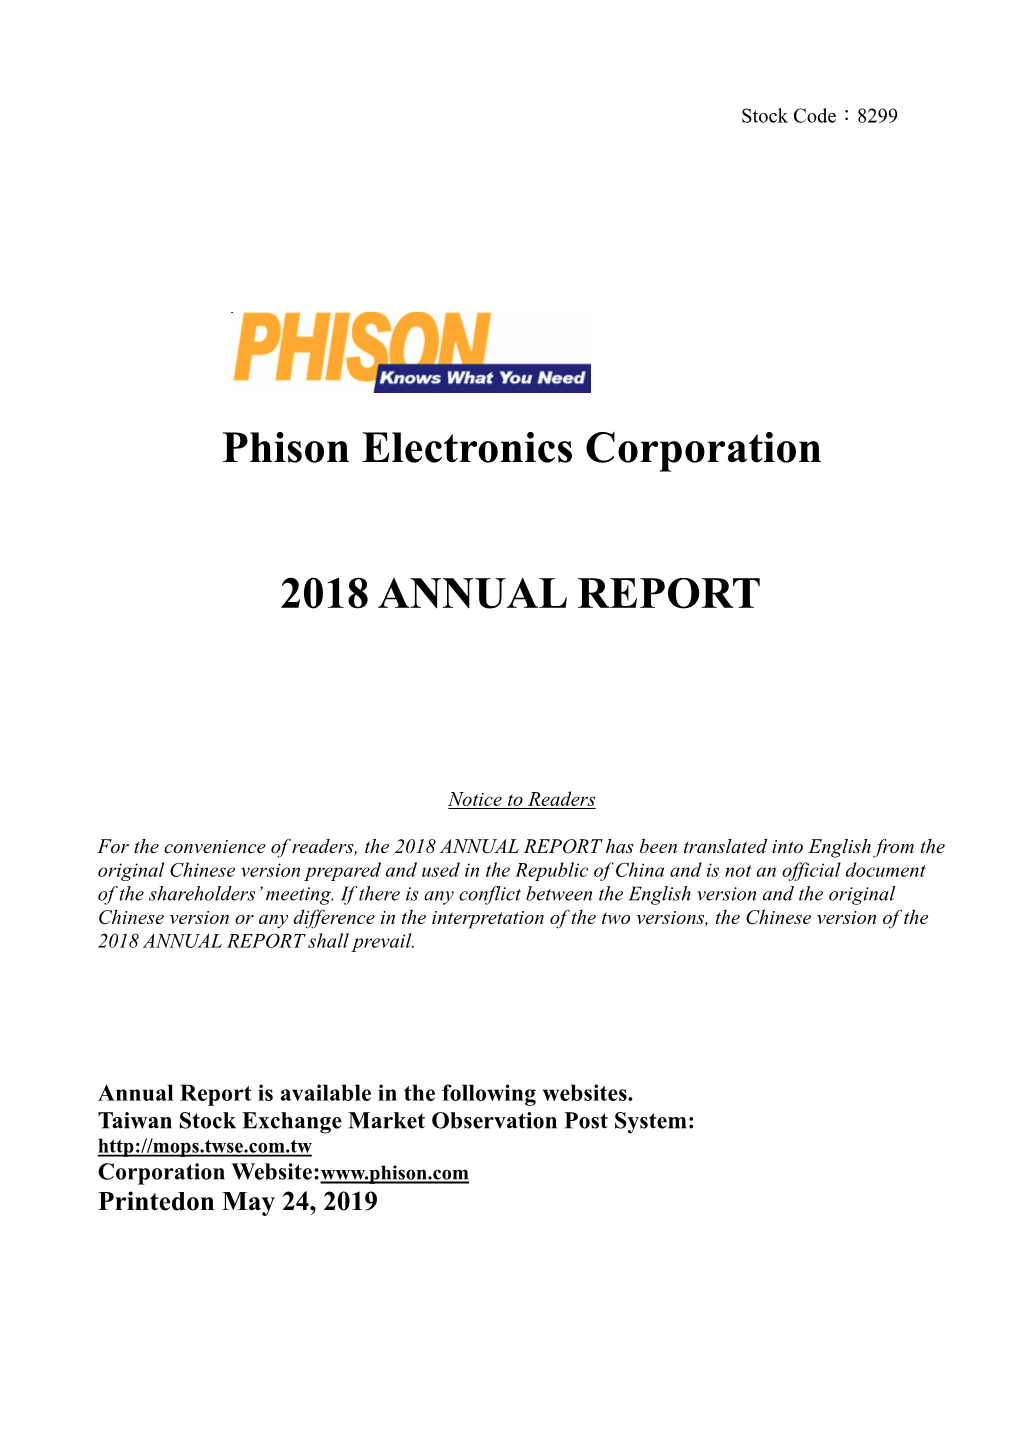 Phison Electronics Corporation 2018 Annual Report Contents